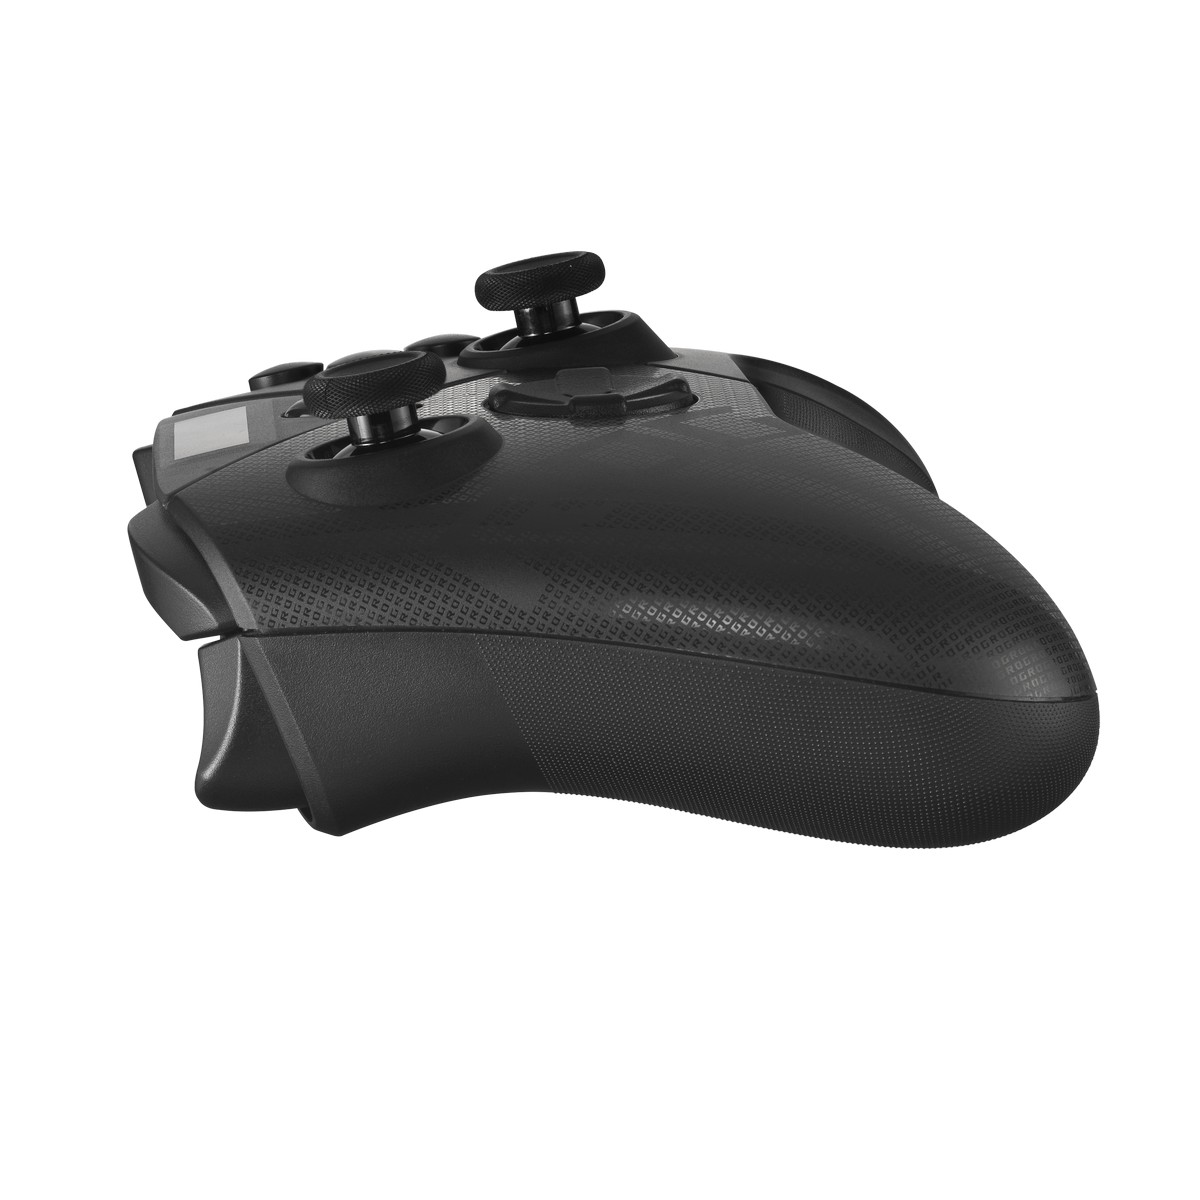 Asus - Asus ROG Raikiri officially licensed XBOX controller For PC and XBOX